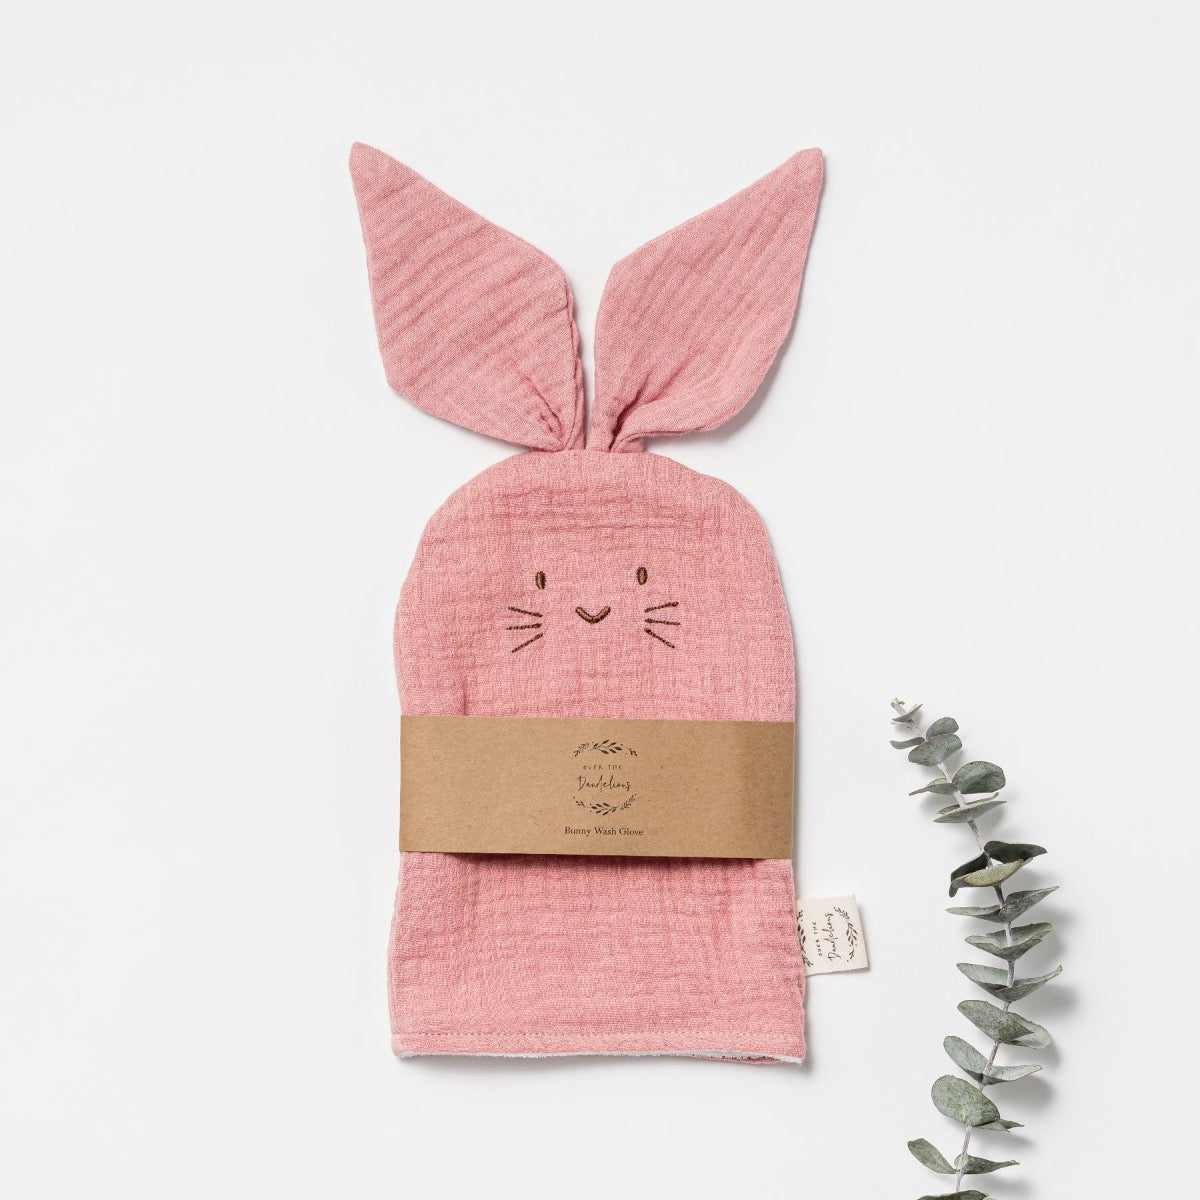 Over the Dandelions-Bunny Wash Glove Shell Pink